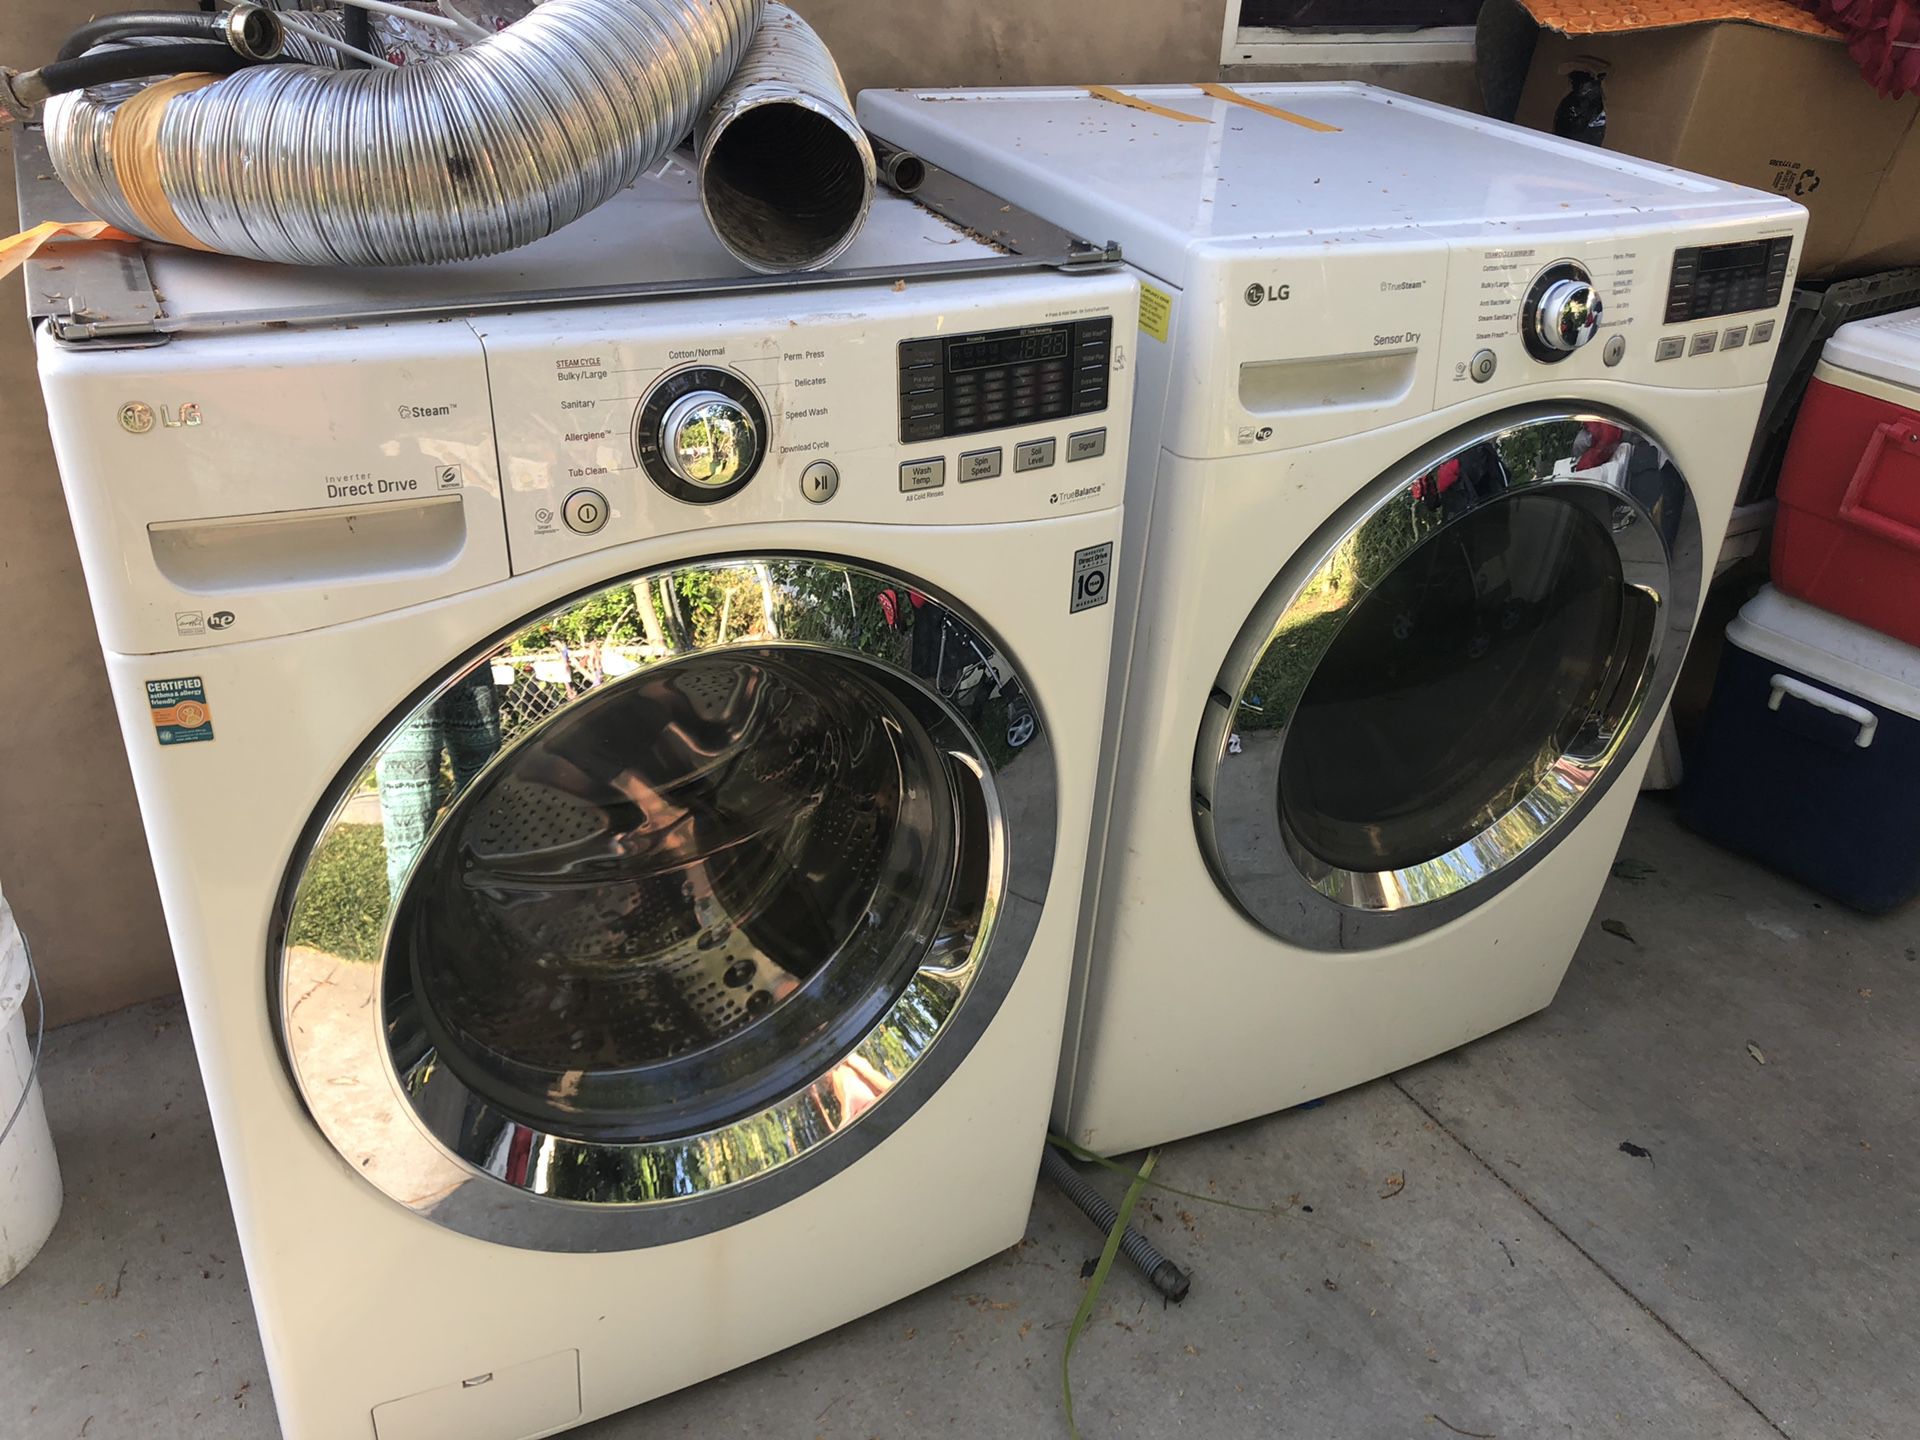 2015 Lg washer and dryer for sale